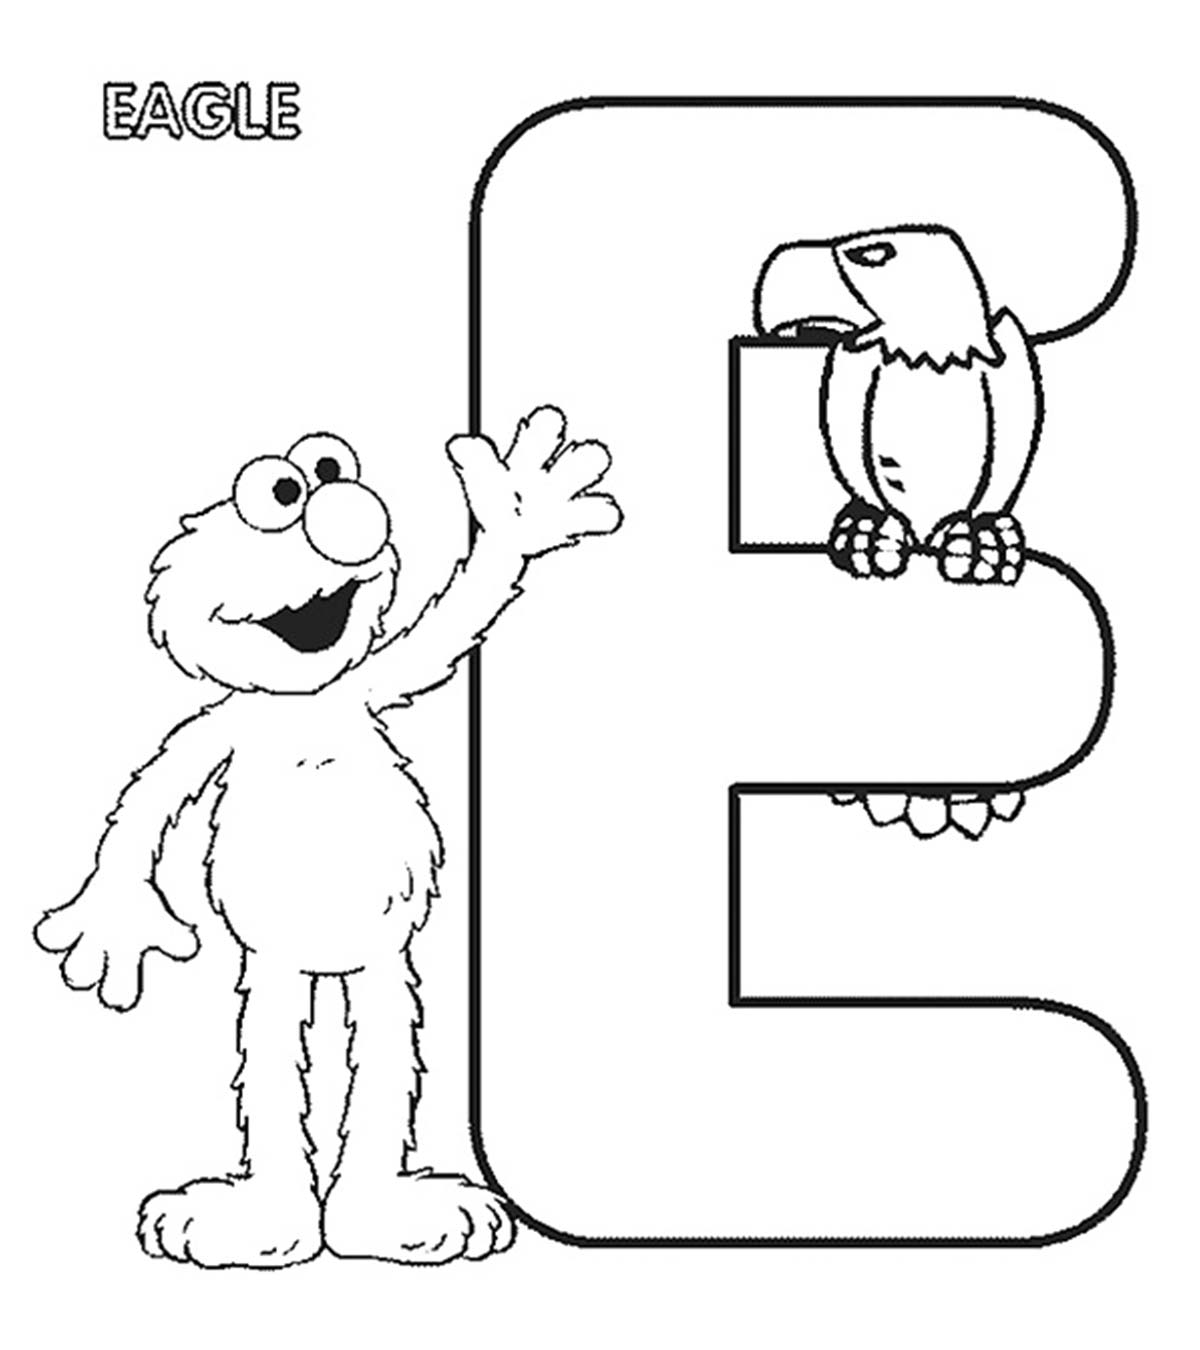 baby sesame street characters coloring pages